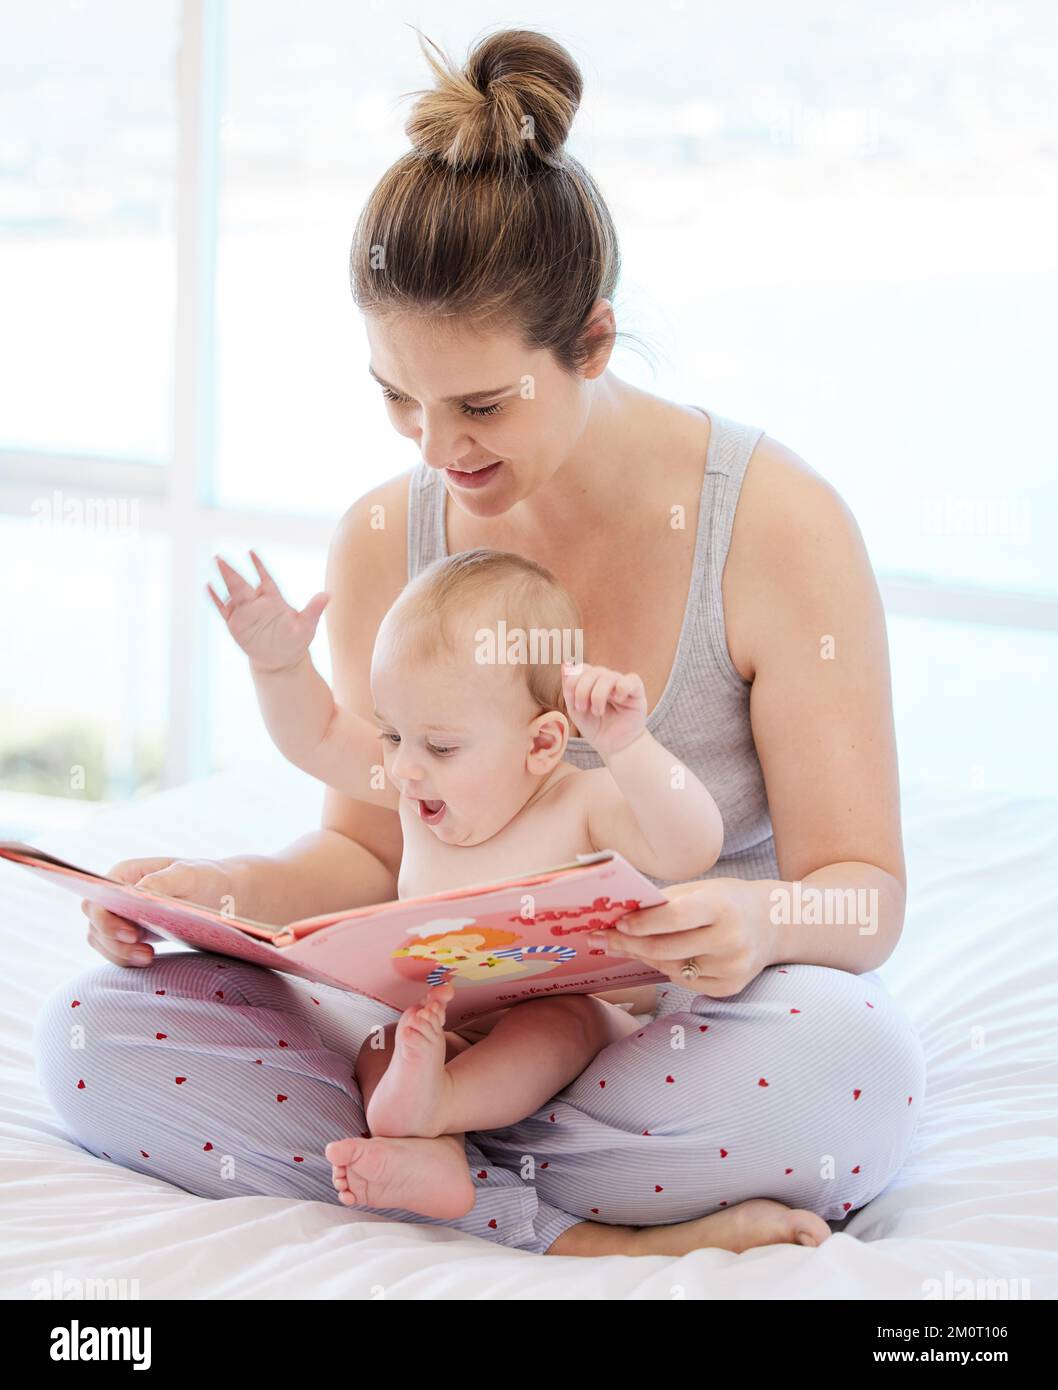 A youthful song of laughter. a young mother bonding with her baby boy while reading a book at home. Stock Photo